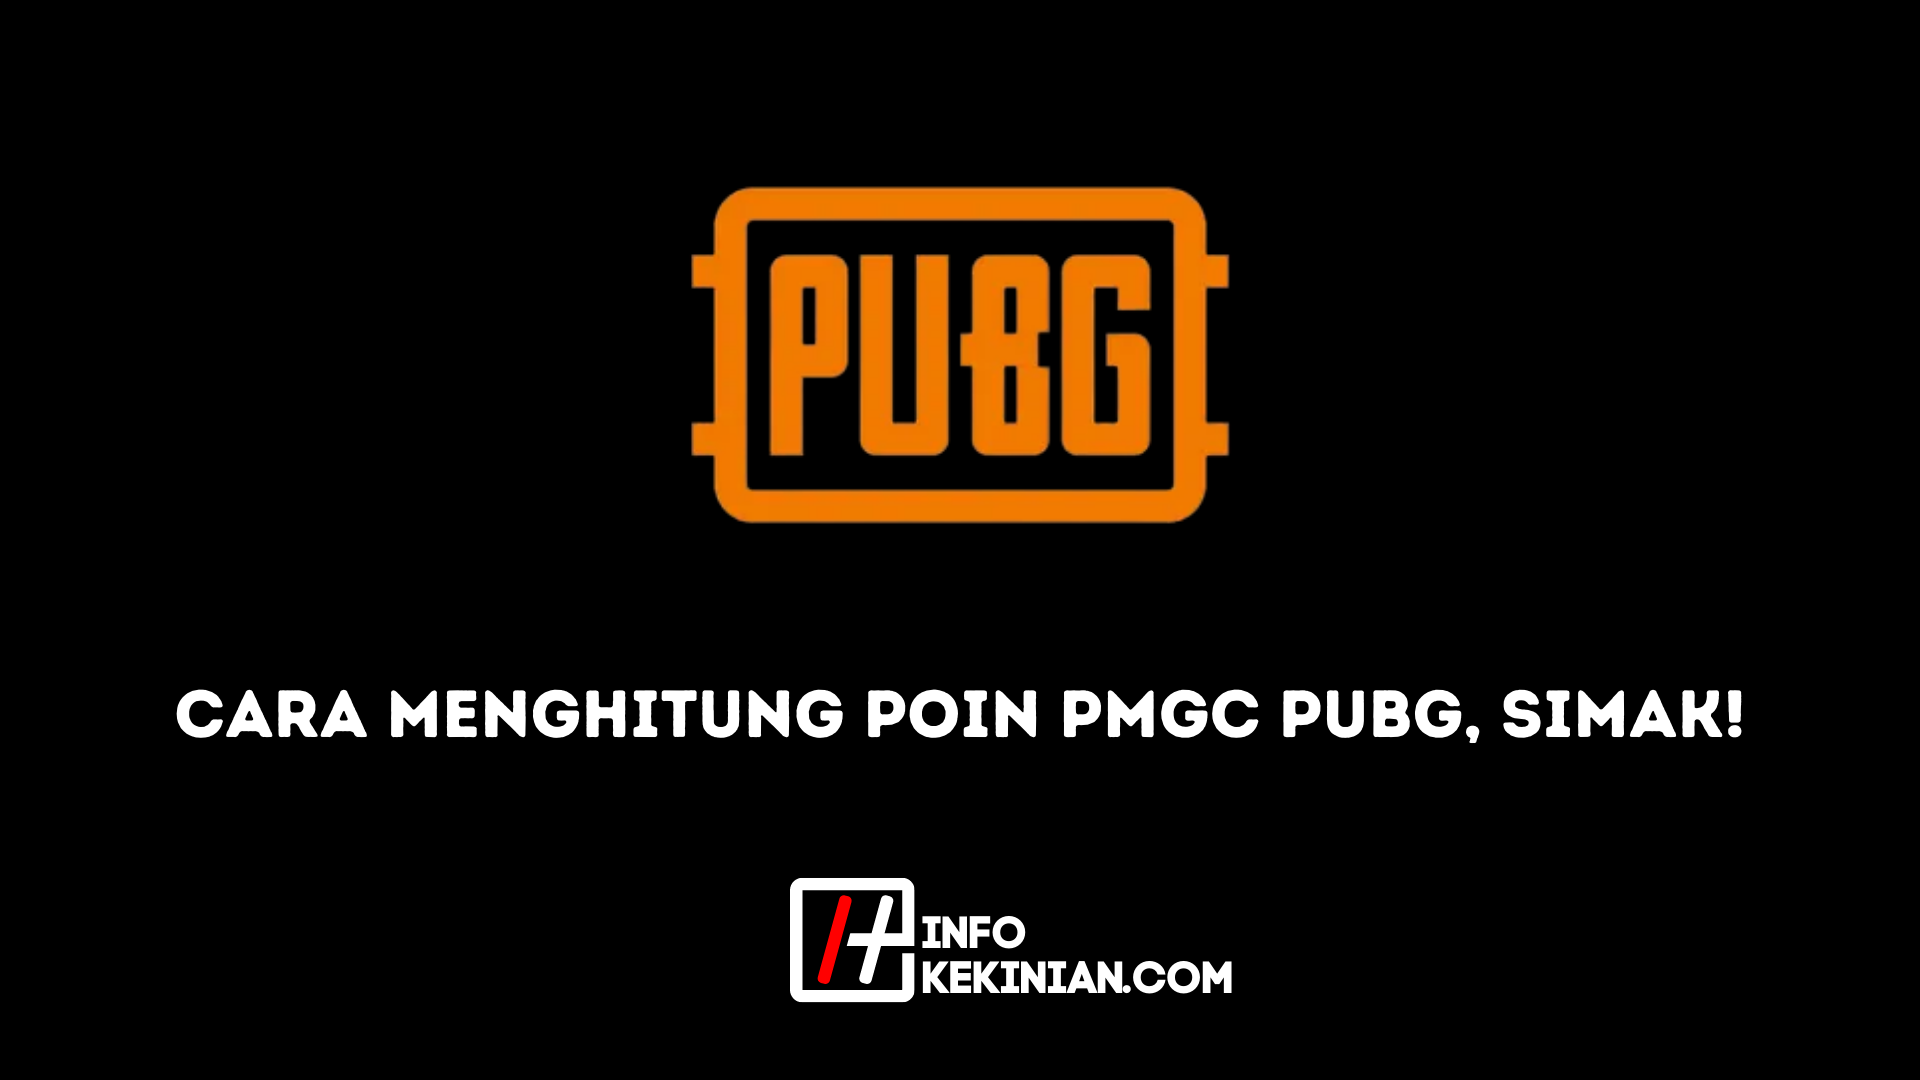 How to Calculate PUBG PMGC Points See